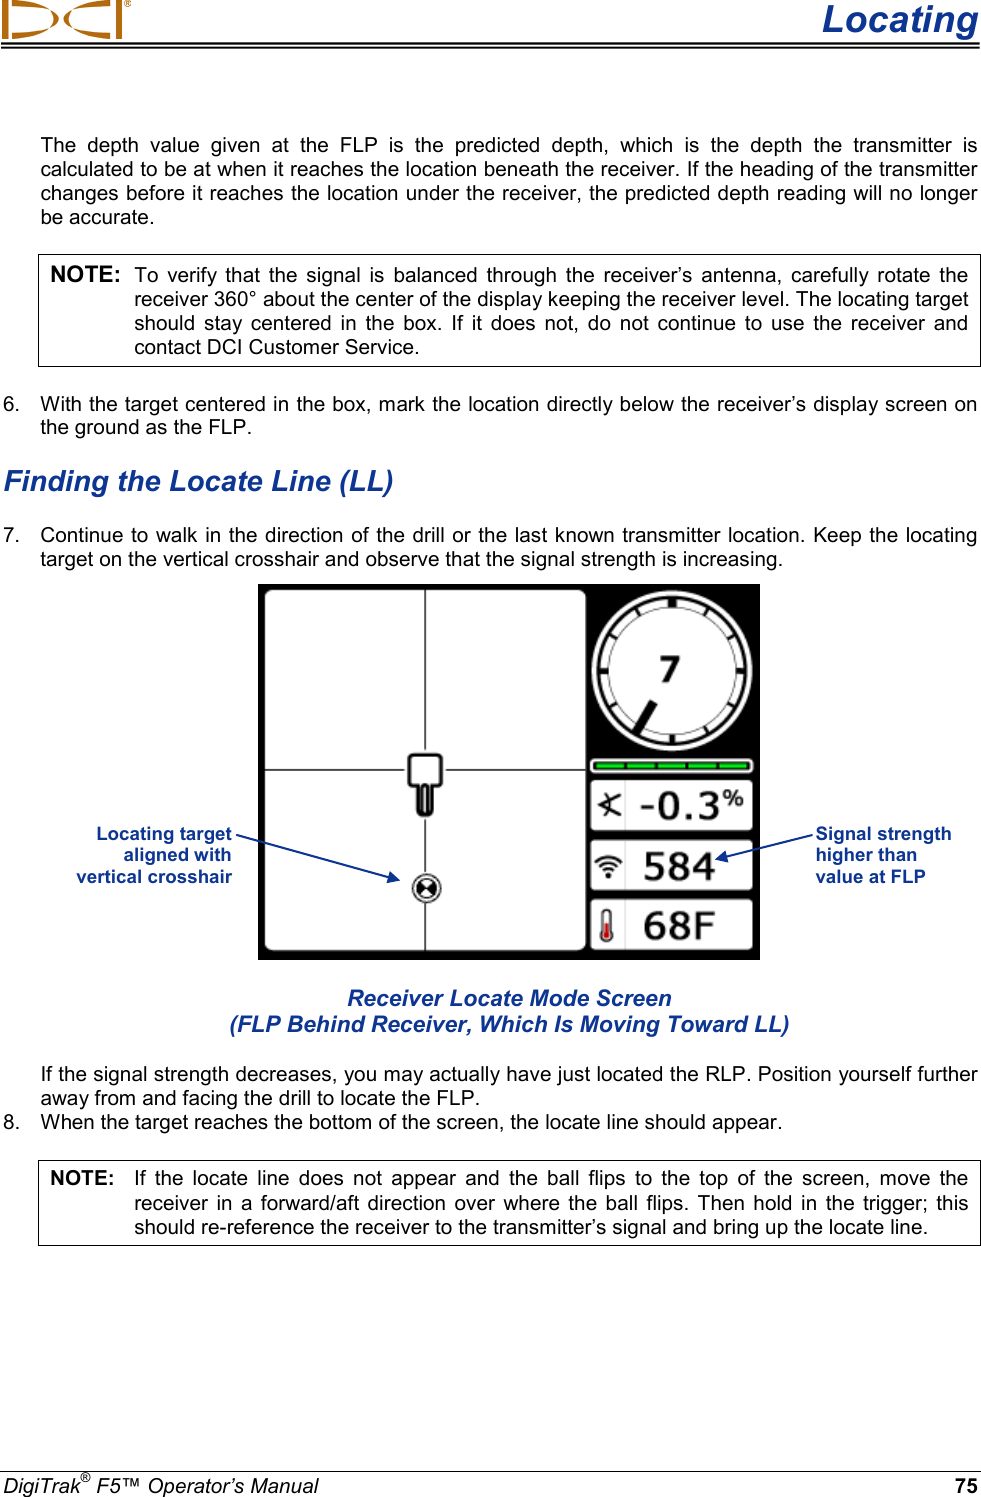  Locating DigiTrak® F5™ Operator’s Manual 75 The depth value given at the FLP is the predicted depth, which is the depth the transmitter is calculated to be at when it reaches the location beneath the receiver. If the heading of the transmitter changes before it reaches the location under the receiver, the predicted depth reading will no longer be accurate. NOTE: To verify that the signal is balanced through the receiver’s antenna, carefully rotate the receiver 360° about the center of the display keeping the receiver level. The locating target should stay centered in the box. If it does not, do not continue to use the receiver and contact DCI Customer Service. 6.  With the target centered in the box, mark the location directly below the receiver’s display screen on the ground as the FLP.  Finding the Locate Line (LL) 7. Continue to walk in the direction of the drill or the last known transmitter location.  Keep the locating target on the vertical crosshair and observe that the signal strength is increasing.   Receiver Locate Mode Screen (FLP Behind Receiver, Which Is Moving Toward LL) If the signal strength decreases, you may actually have just located the RLP. Position yourself further away from and facing the drill to locate the FLP. 8. When the target reaches the bottom of the screen, the locate line should appear.  NOTE: If the locate line does not appear and the ball flips to the top of the screen, move the receiver in a forward/aft direction over where the ball flips. Then hold in  the trigger;  this should re-reference the receiver to the transmitter’s signal and bring up the locate line.  Signal strength higher than value at FLP Locating target  aligned with  vertical crosshair  